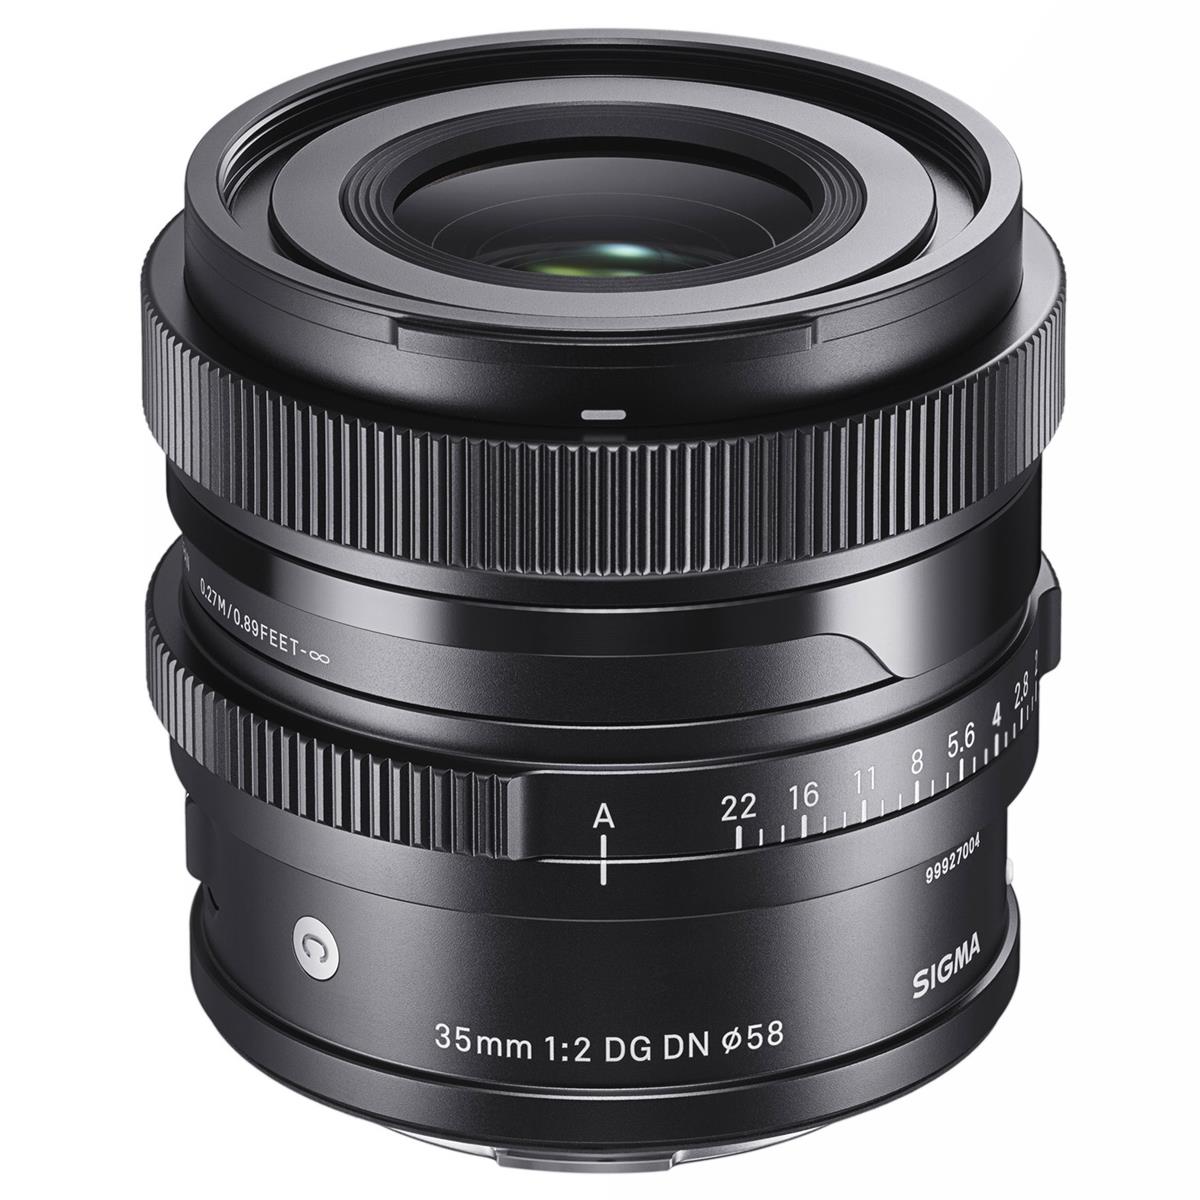 

Sigma 35mm f/2.0 DG DN Contemporary Lens for L Mount